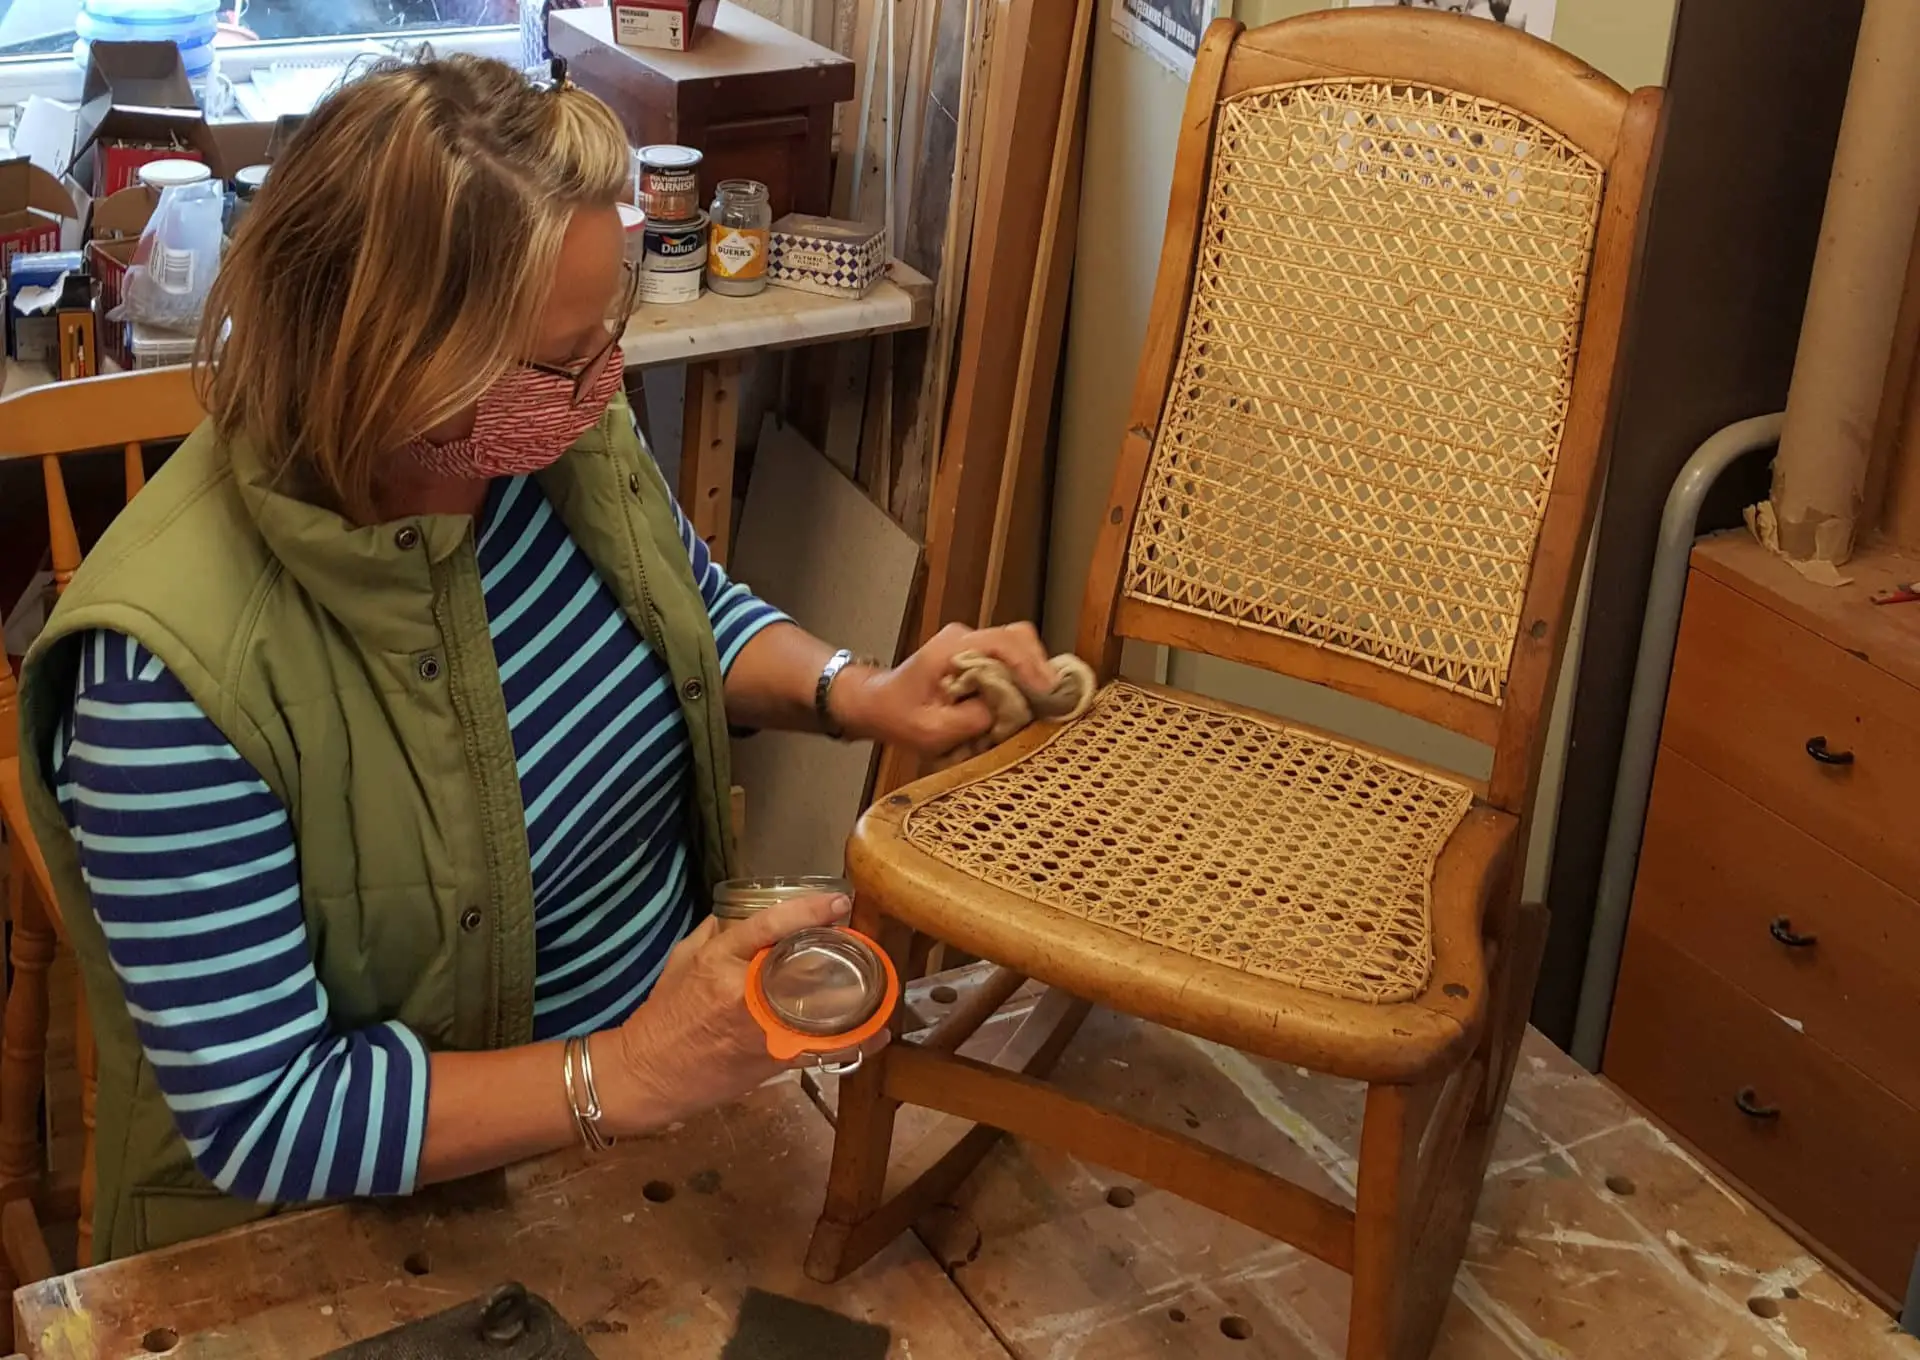 Women are welcome at Cowes Men's Shed